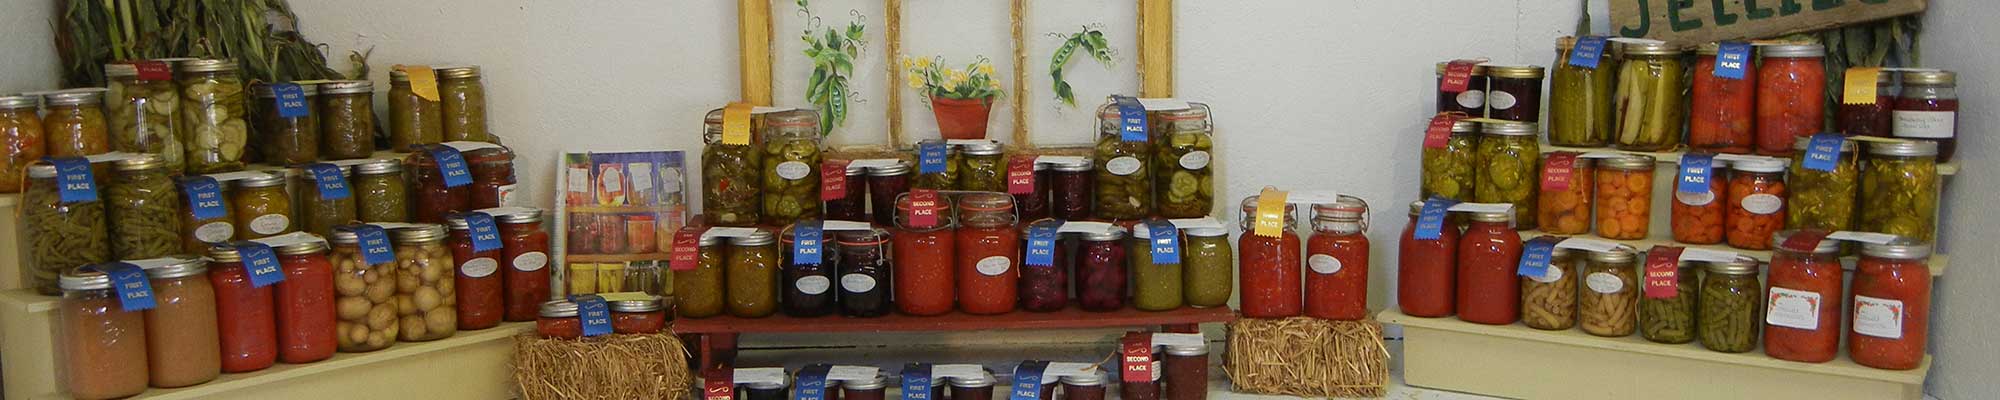 Canning and Jar Display | Agriculture Exhibitor Information